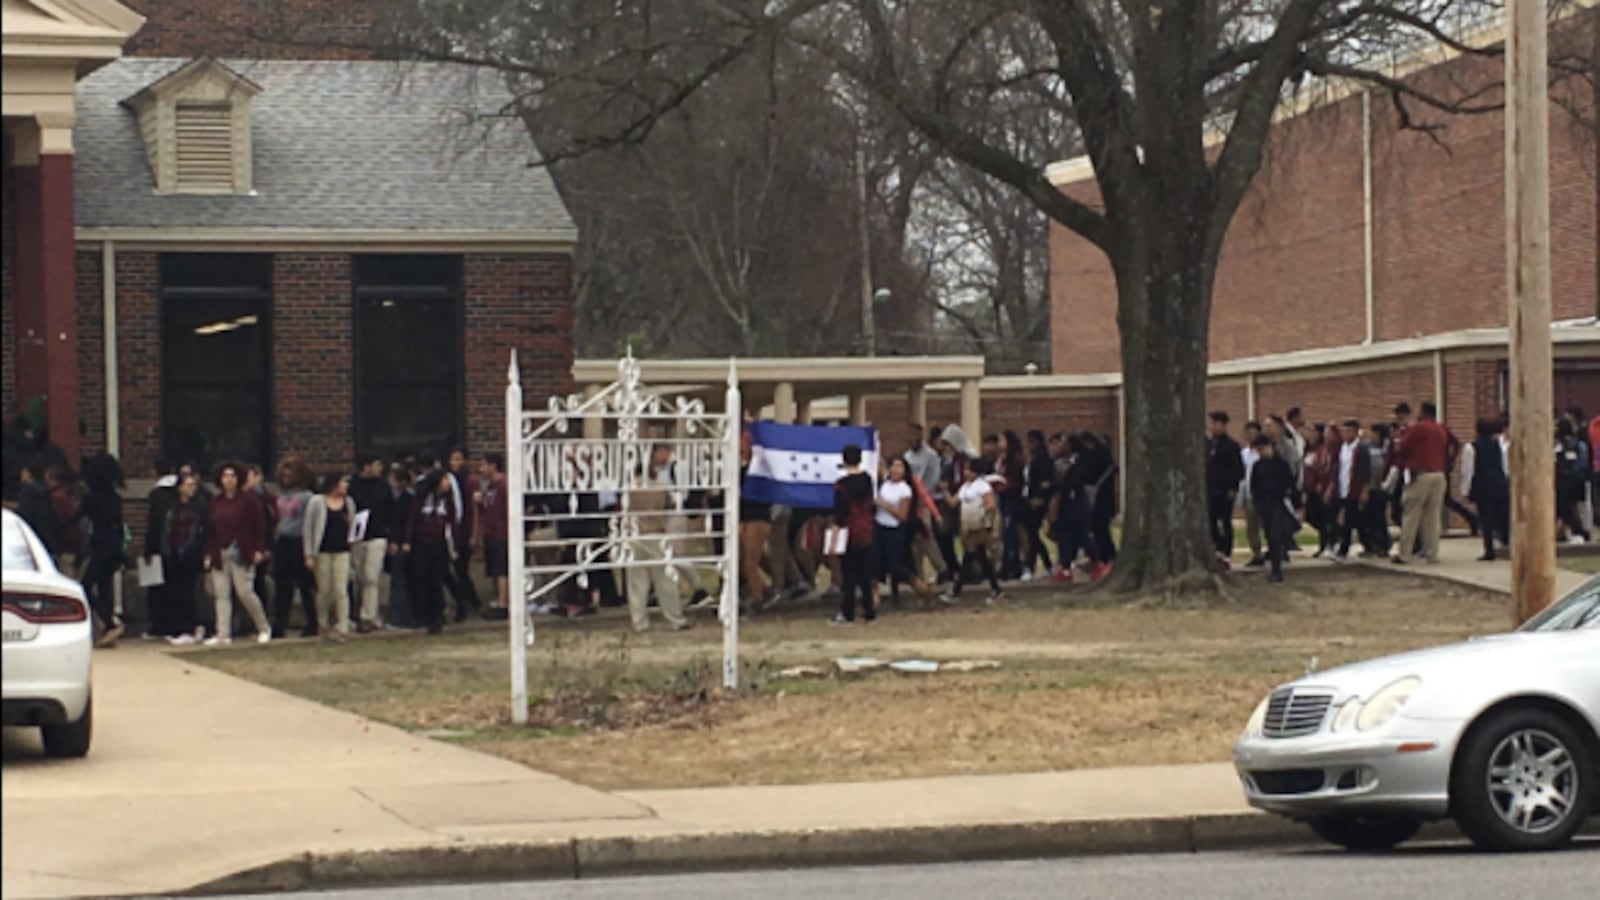 Students at Kingsbury High School hold up flags as they march during a student-organized walkout on their campus in Memphis.